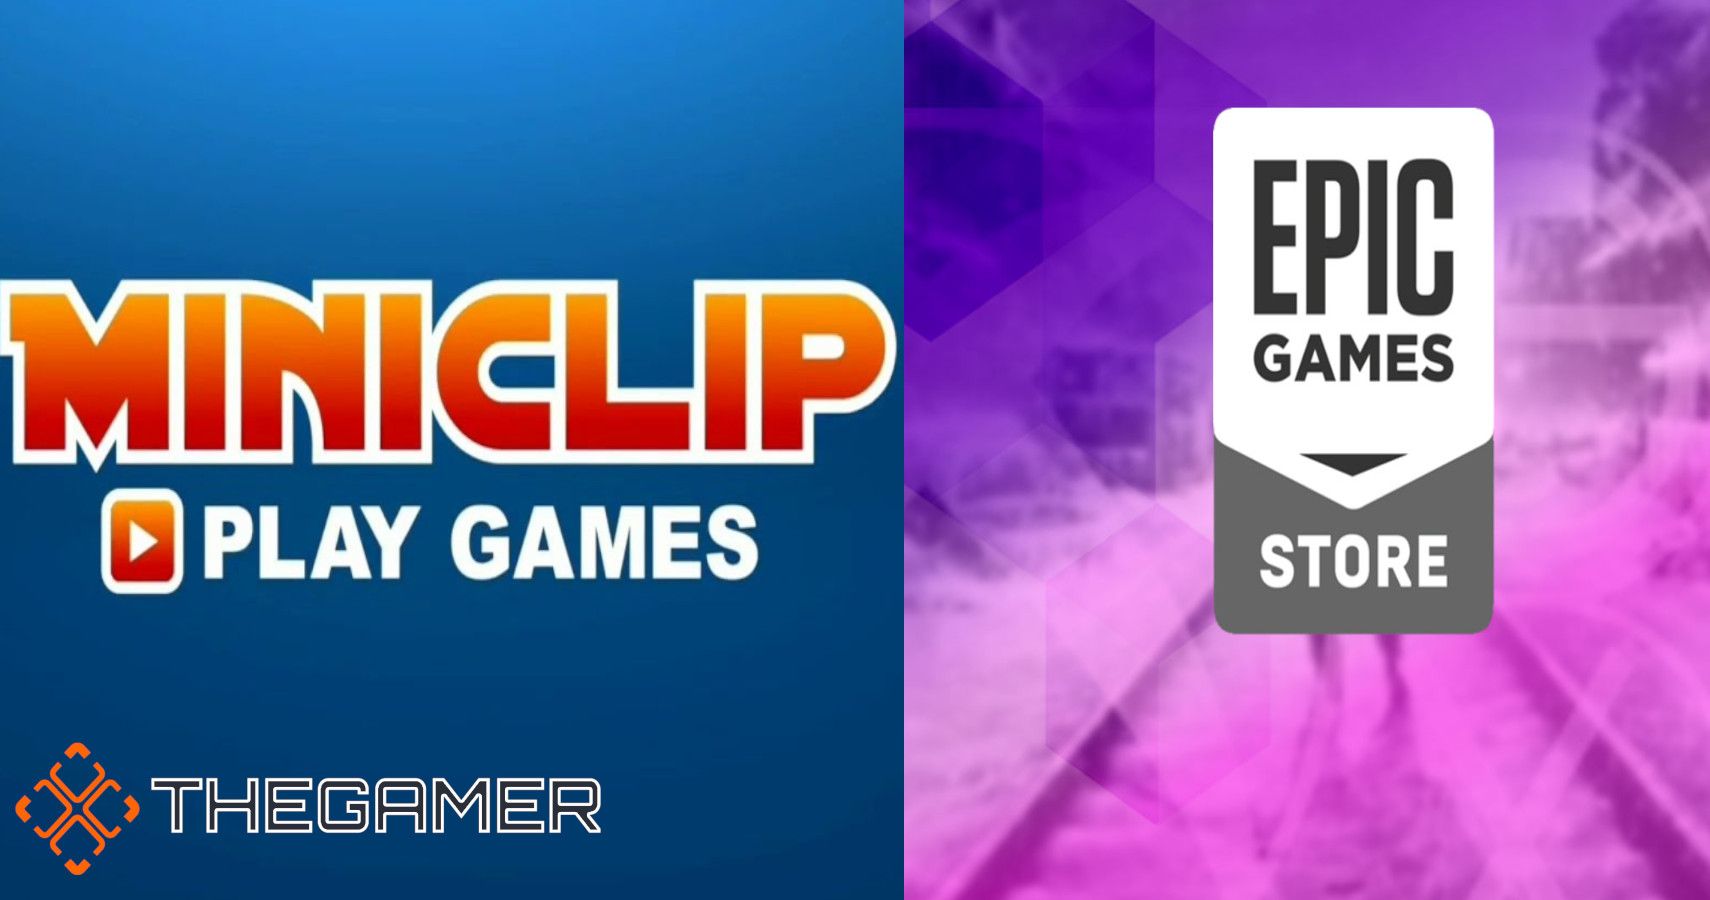 the miniclip and epic game store logos